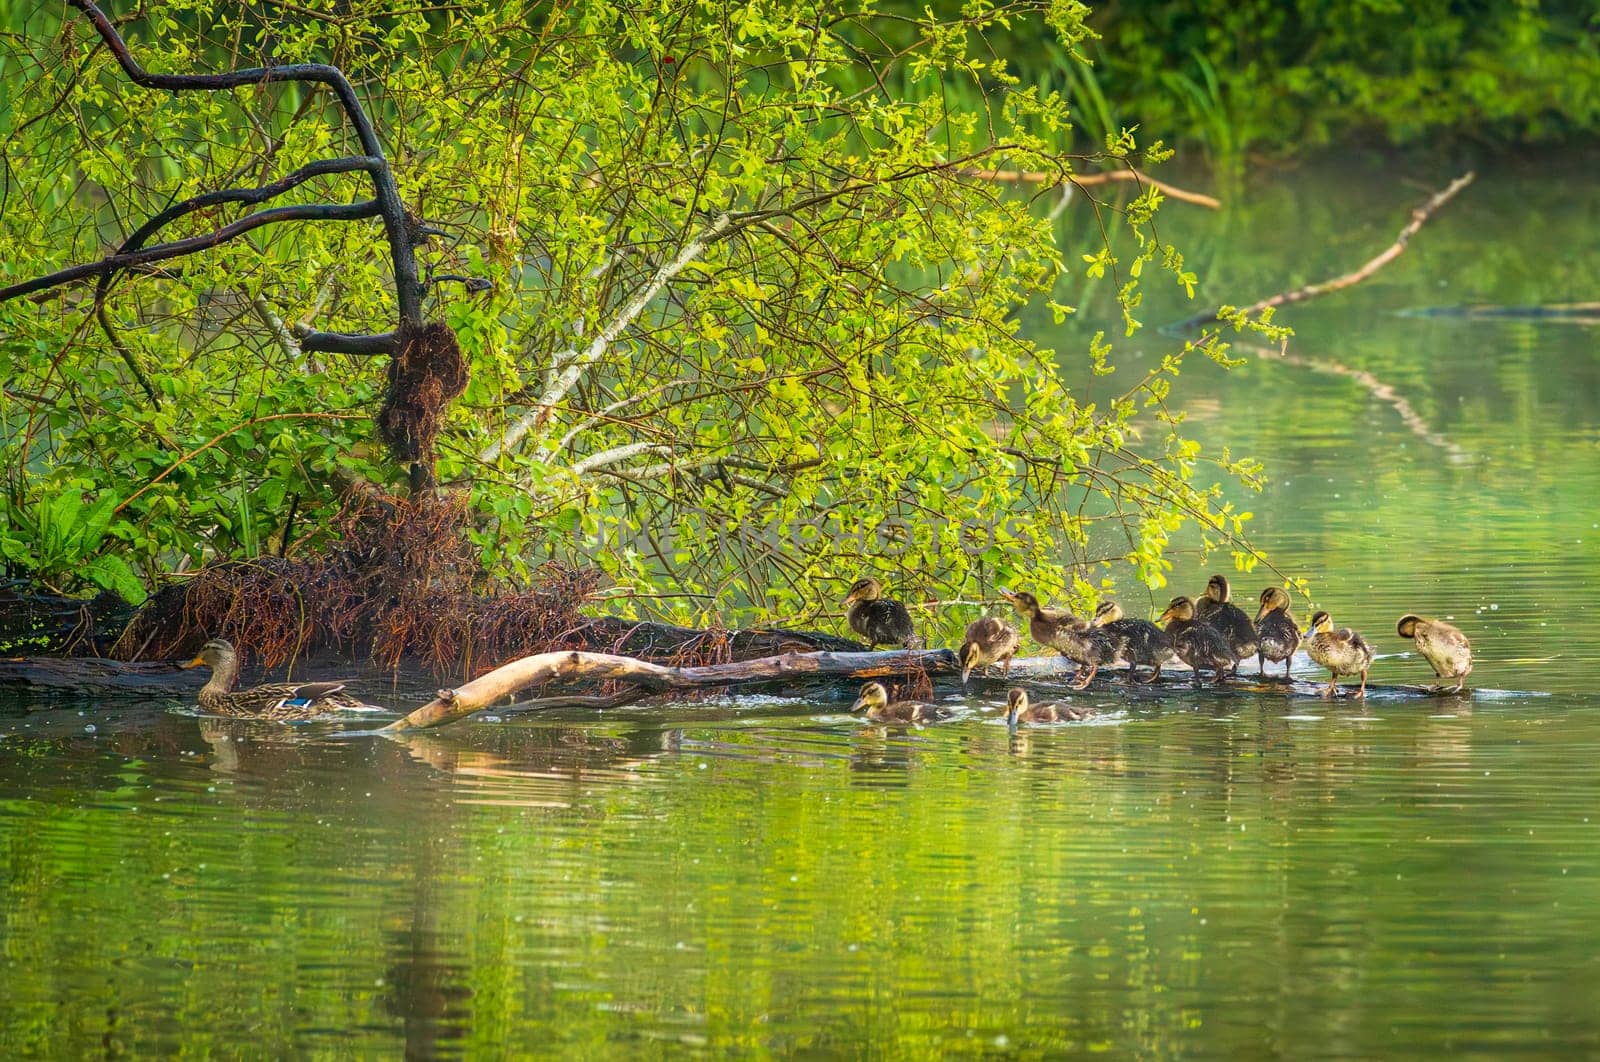 Group of young ducklings on log in lake getting ready for the night and washing feathers